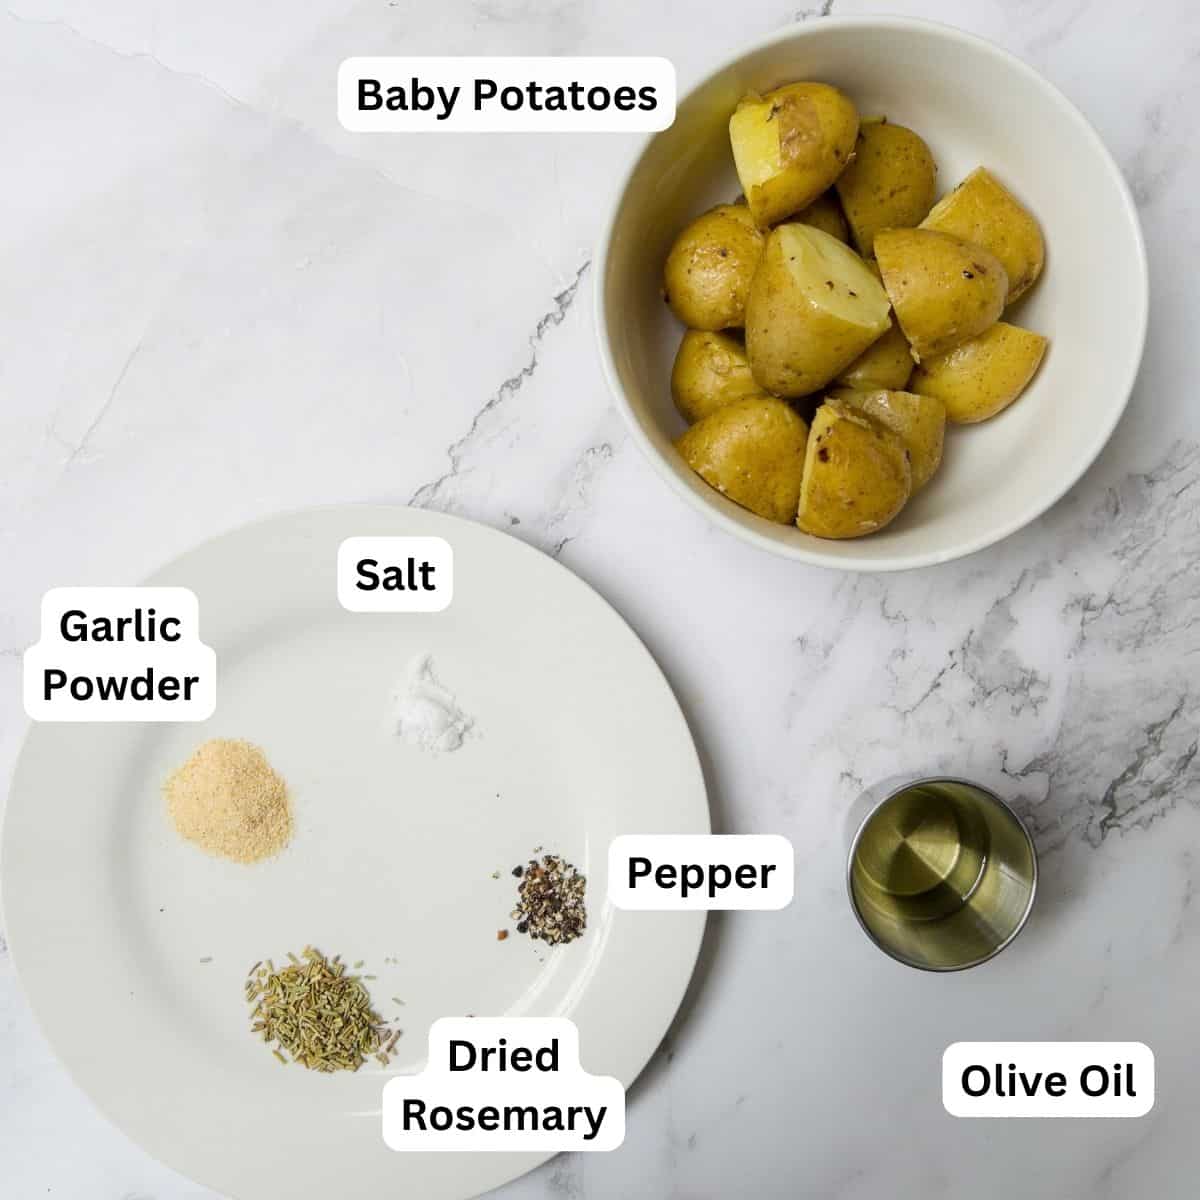 Ingredients laid out for smashed potatoes.